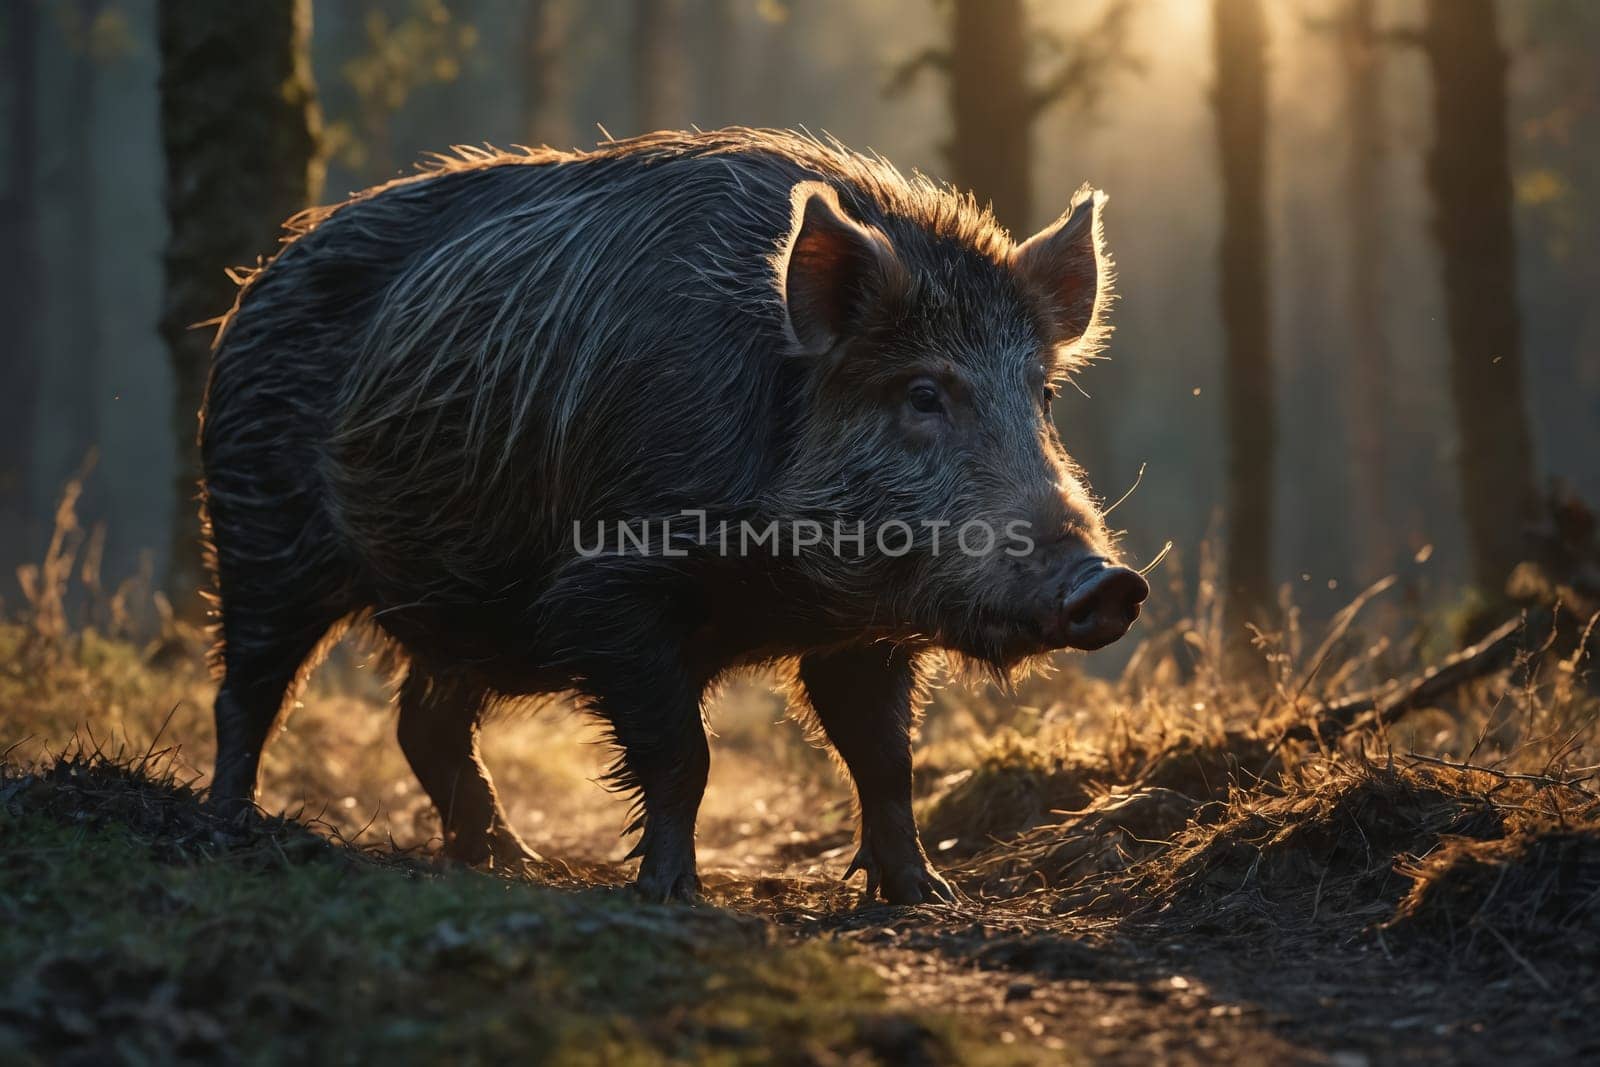 A wild boar looks curiously at the camera, illuminated by sunlight filtering through bare trees.